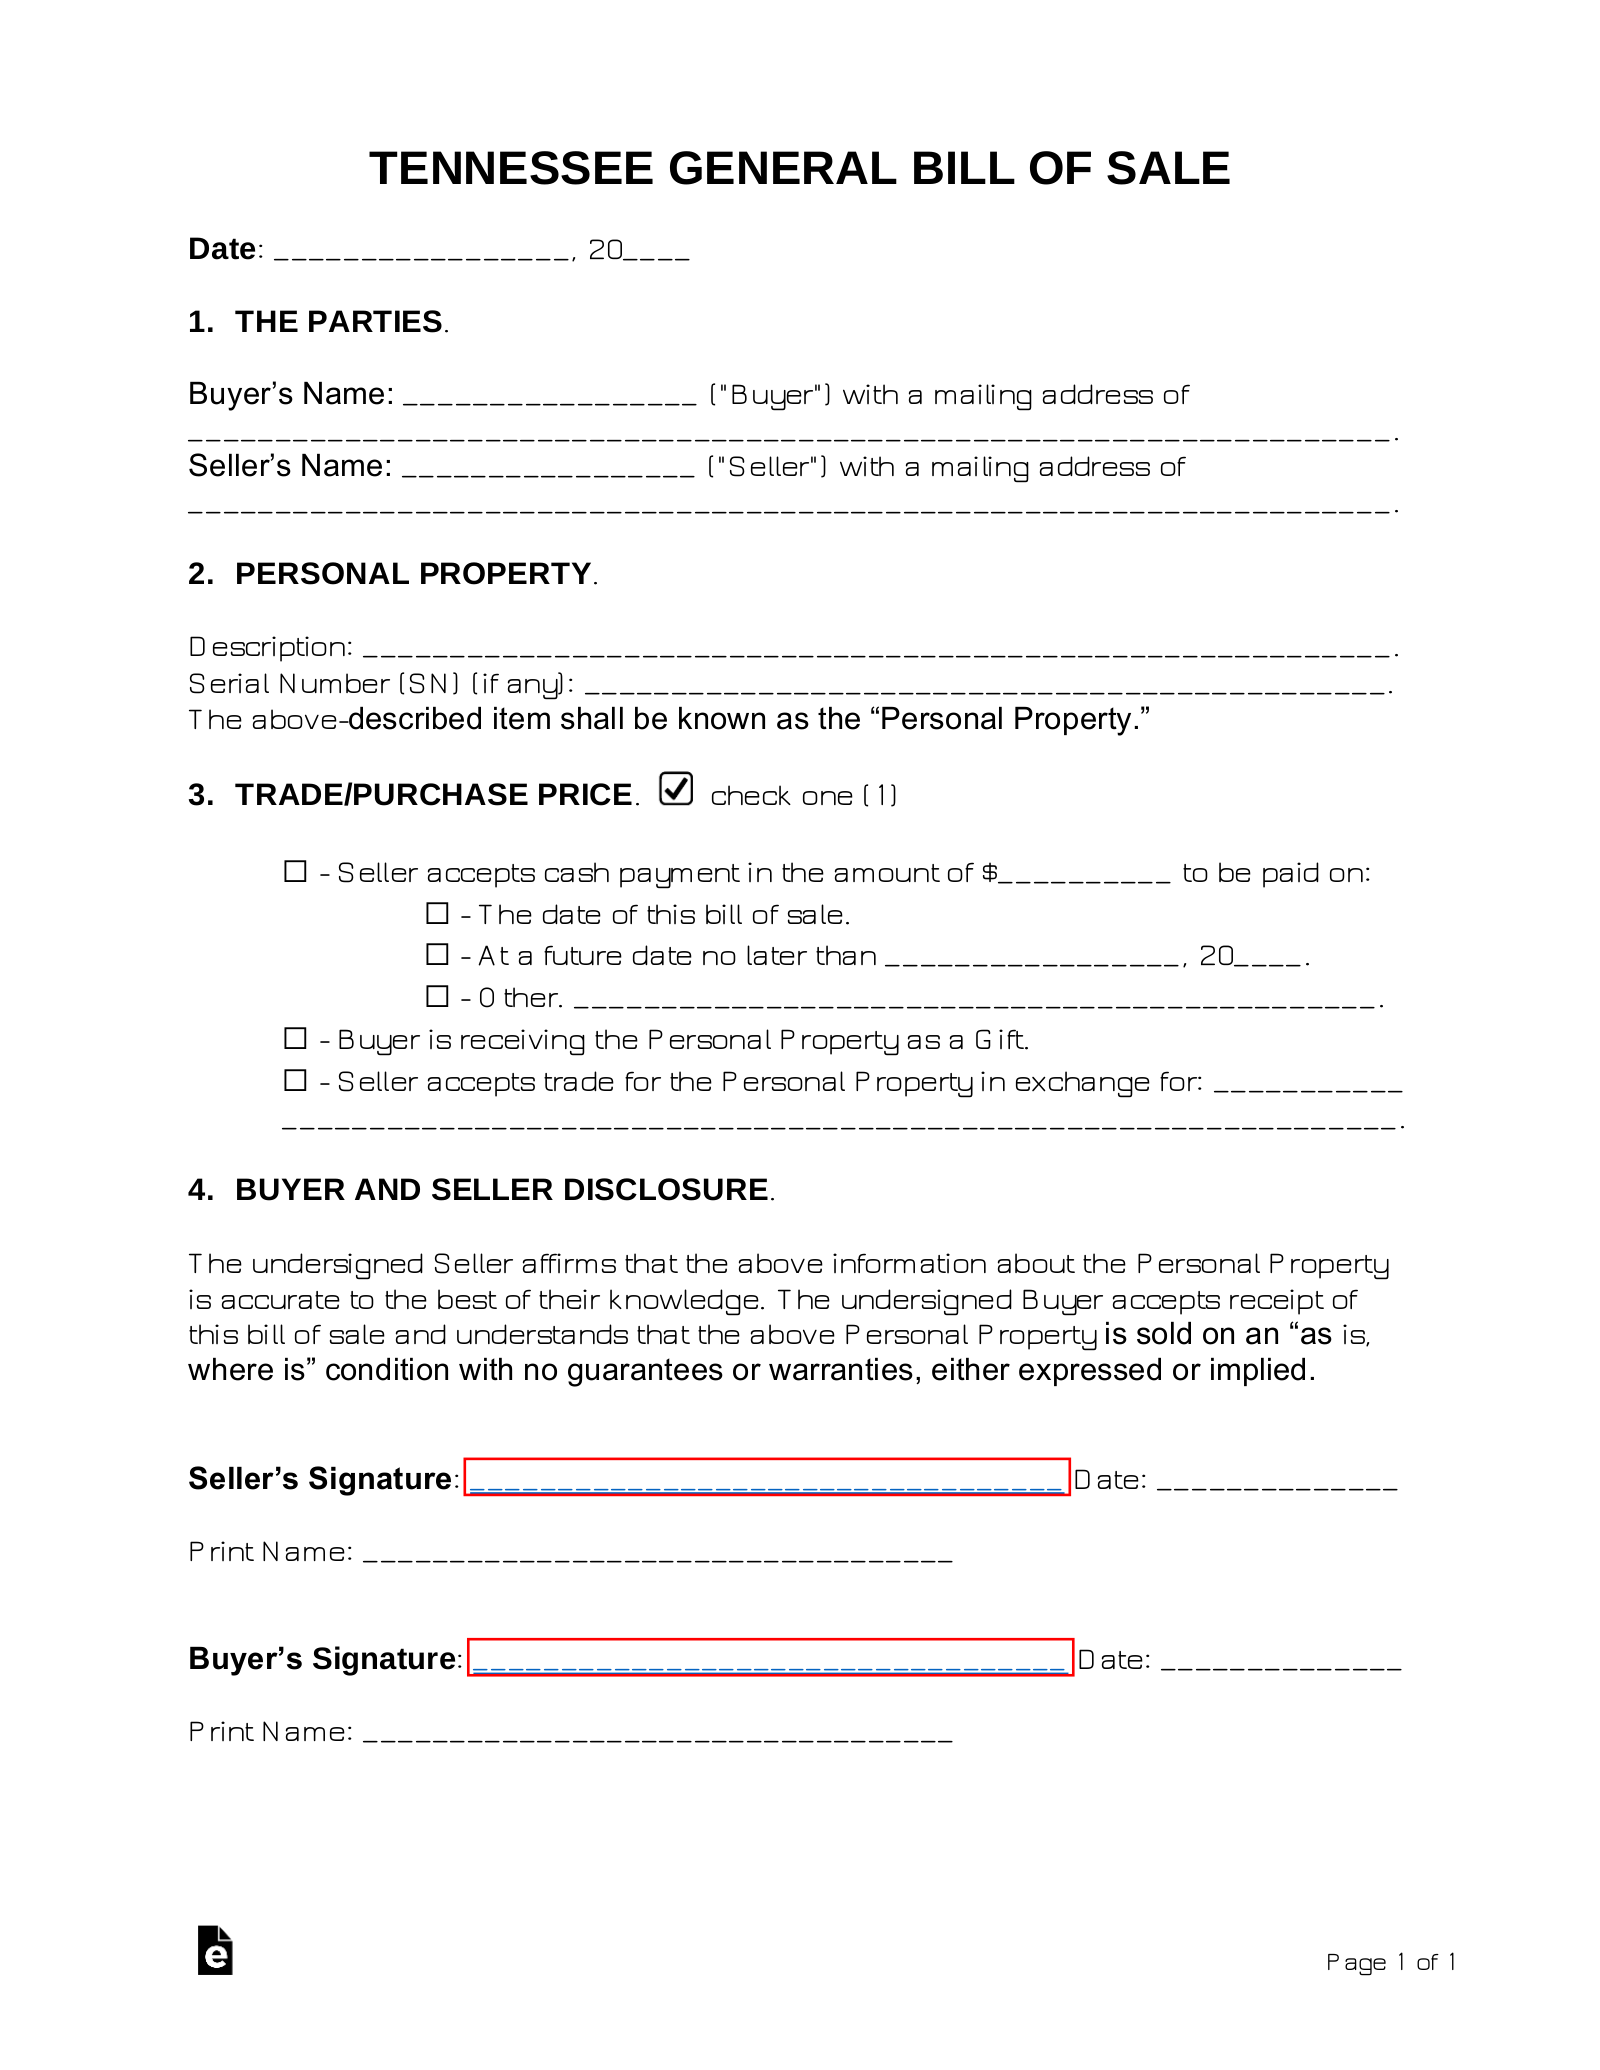 free-tennessee-general-bill-of-sale-form-pdf-word-eforms